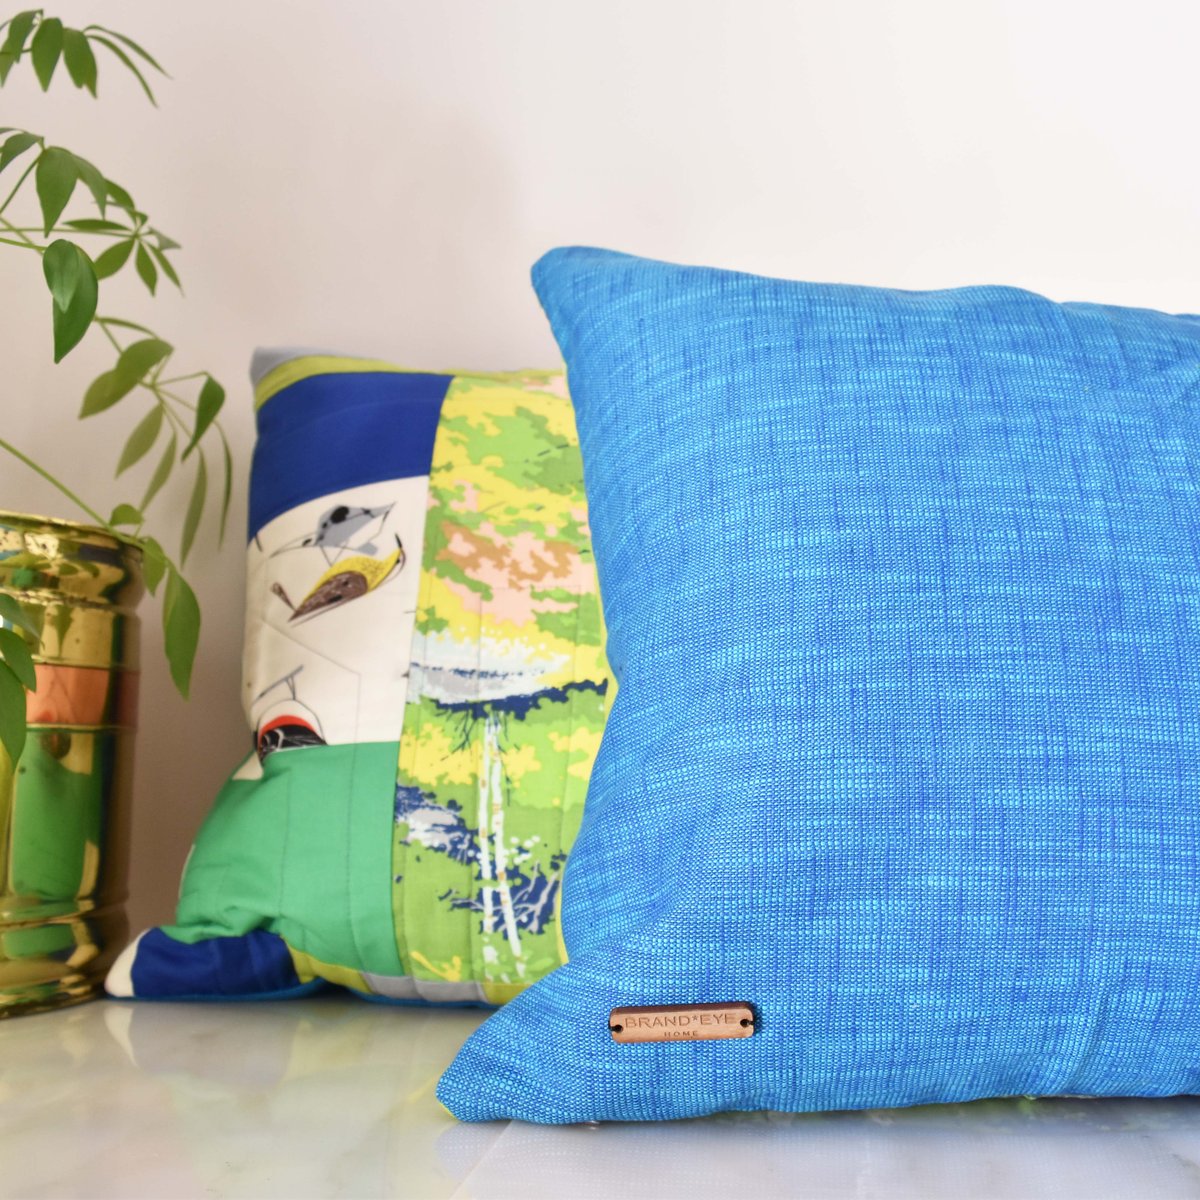 Image of Blue and Green One of a Kind Pillows